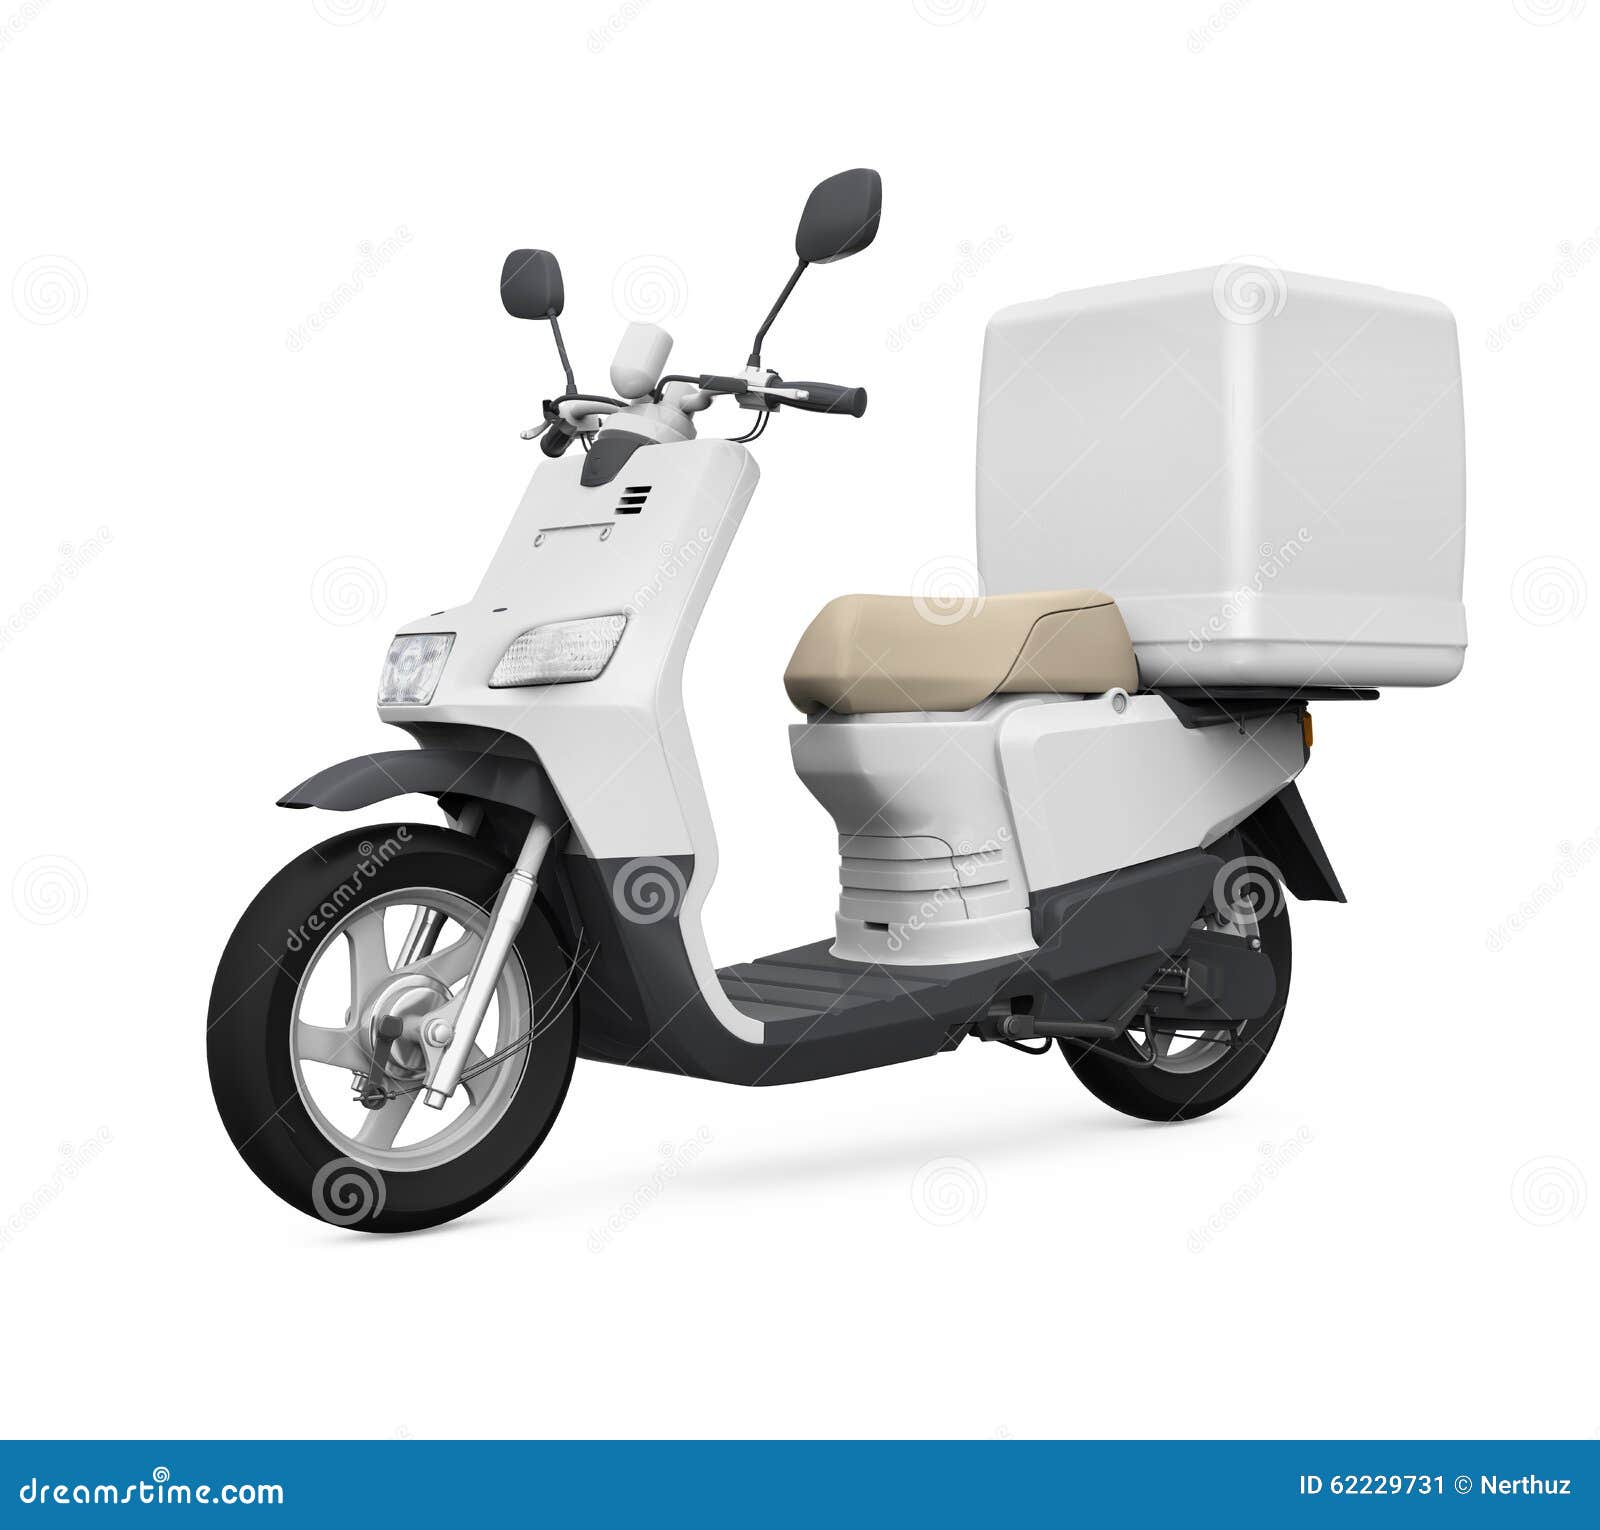 Download Motorcycle Delivery Box stock illustration. Illustration of vehicle - 62229731